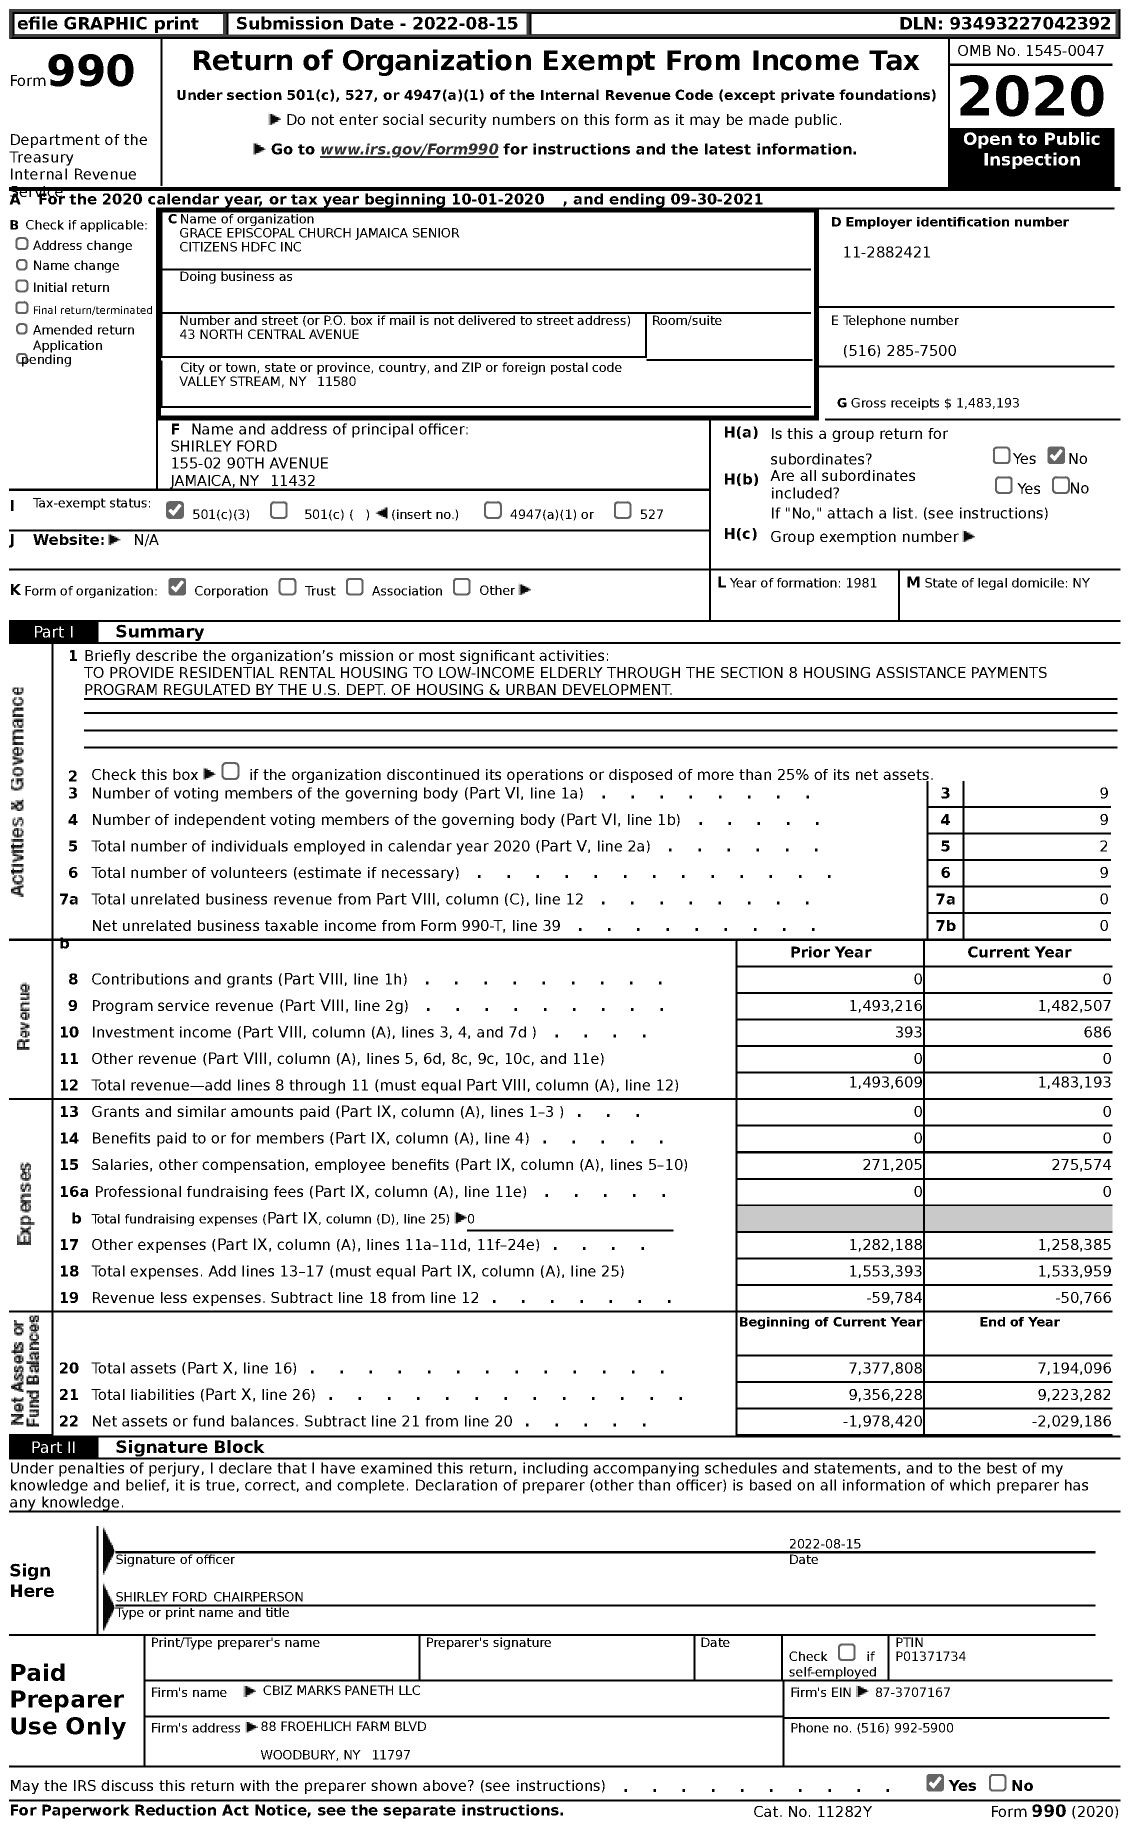 Image of first page of 2020 Form 990 for Grace Episcopal Church Jamaica Senior Citizens HDFC